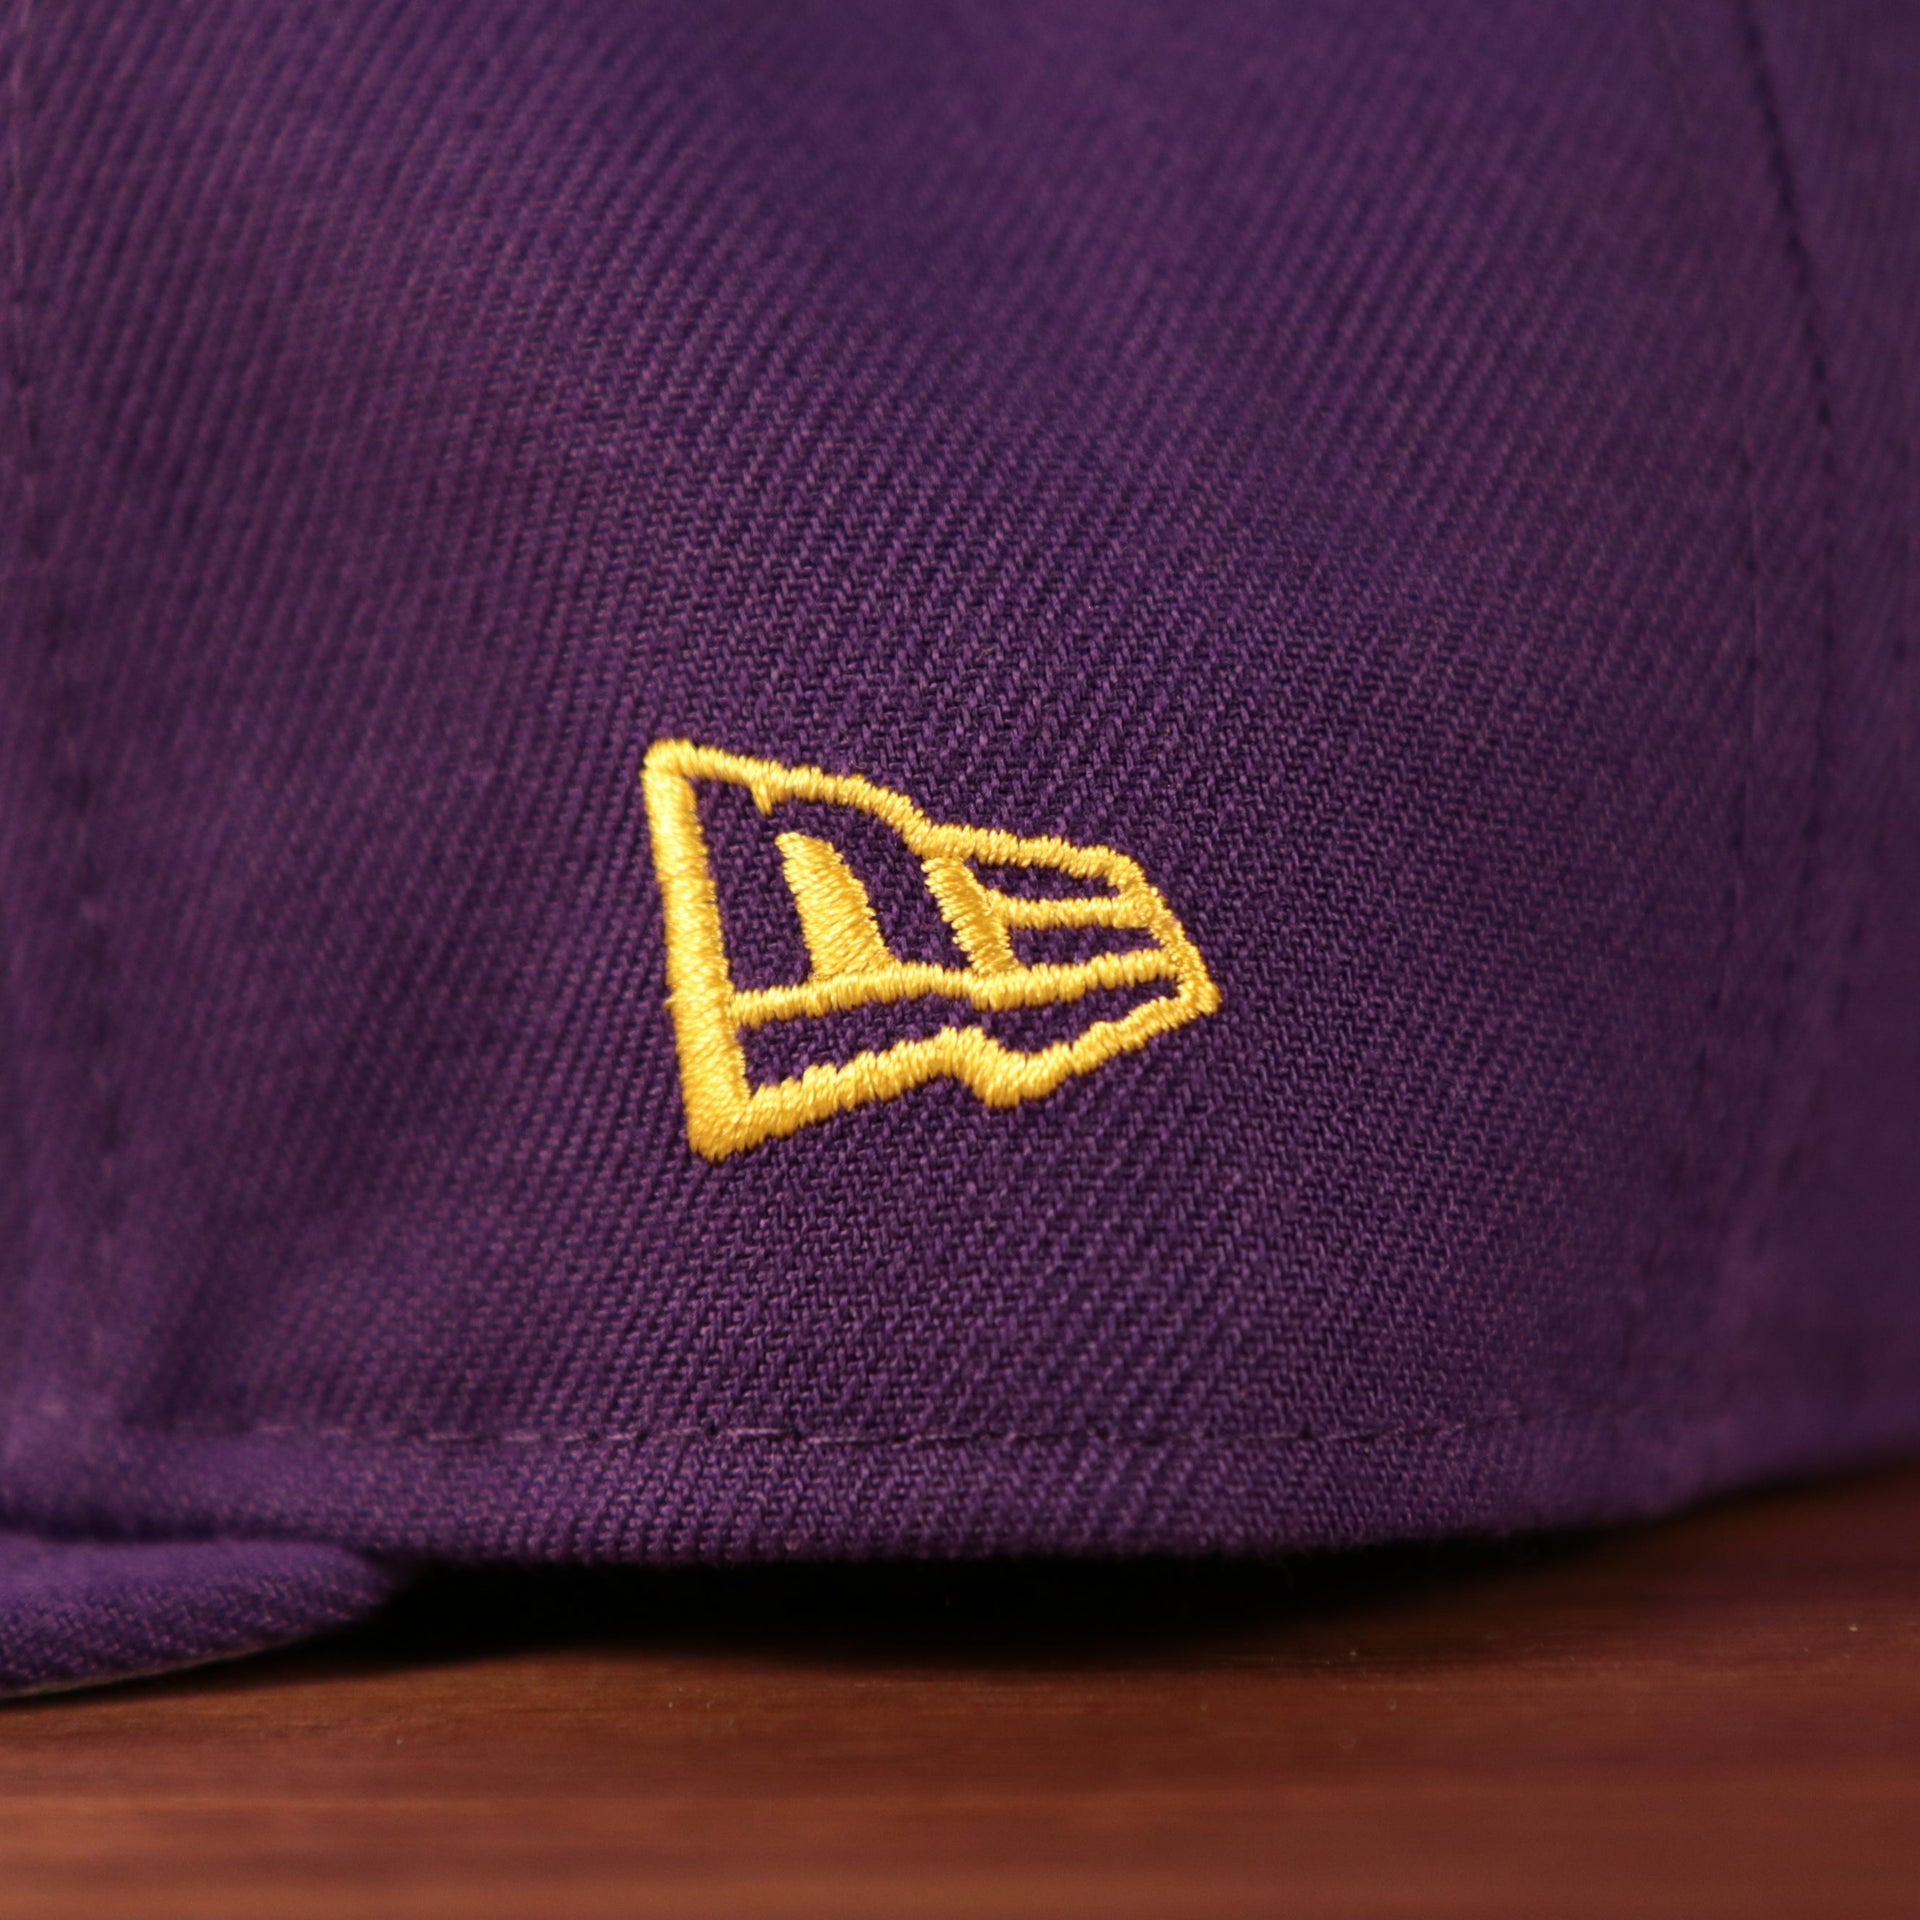 The yellow New Era logo on the left side of the purple logo tear Los Angeles Lakers 950 snapback hat.